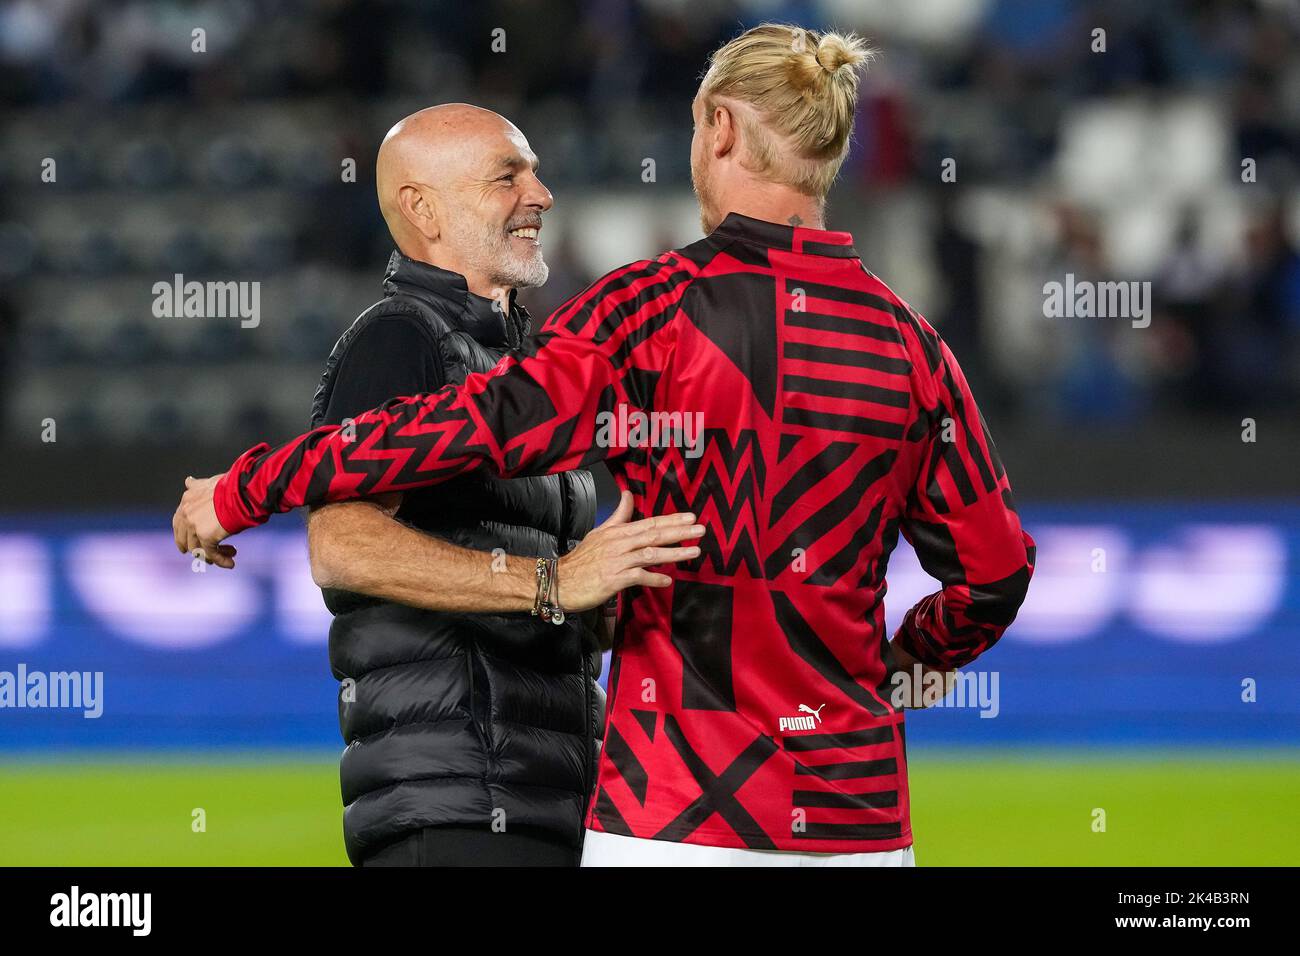 Empoli, Italy. 01st Oct, 2022. Stefano Pioli head coach of AC Milan and Simon Kjær prior to the Serie A football match between Empoli FC and AC Milan at Carlo Castellani stadium in Empoli (Italy), October 1st, 2022. Photo Paolo Nucci/Insidefoto Credit: Insidefoto di andrea staccioli/Alamy Live News Stock Photo